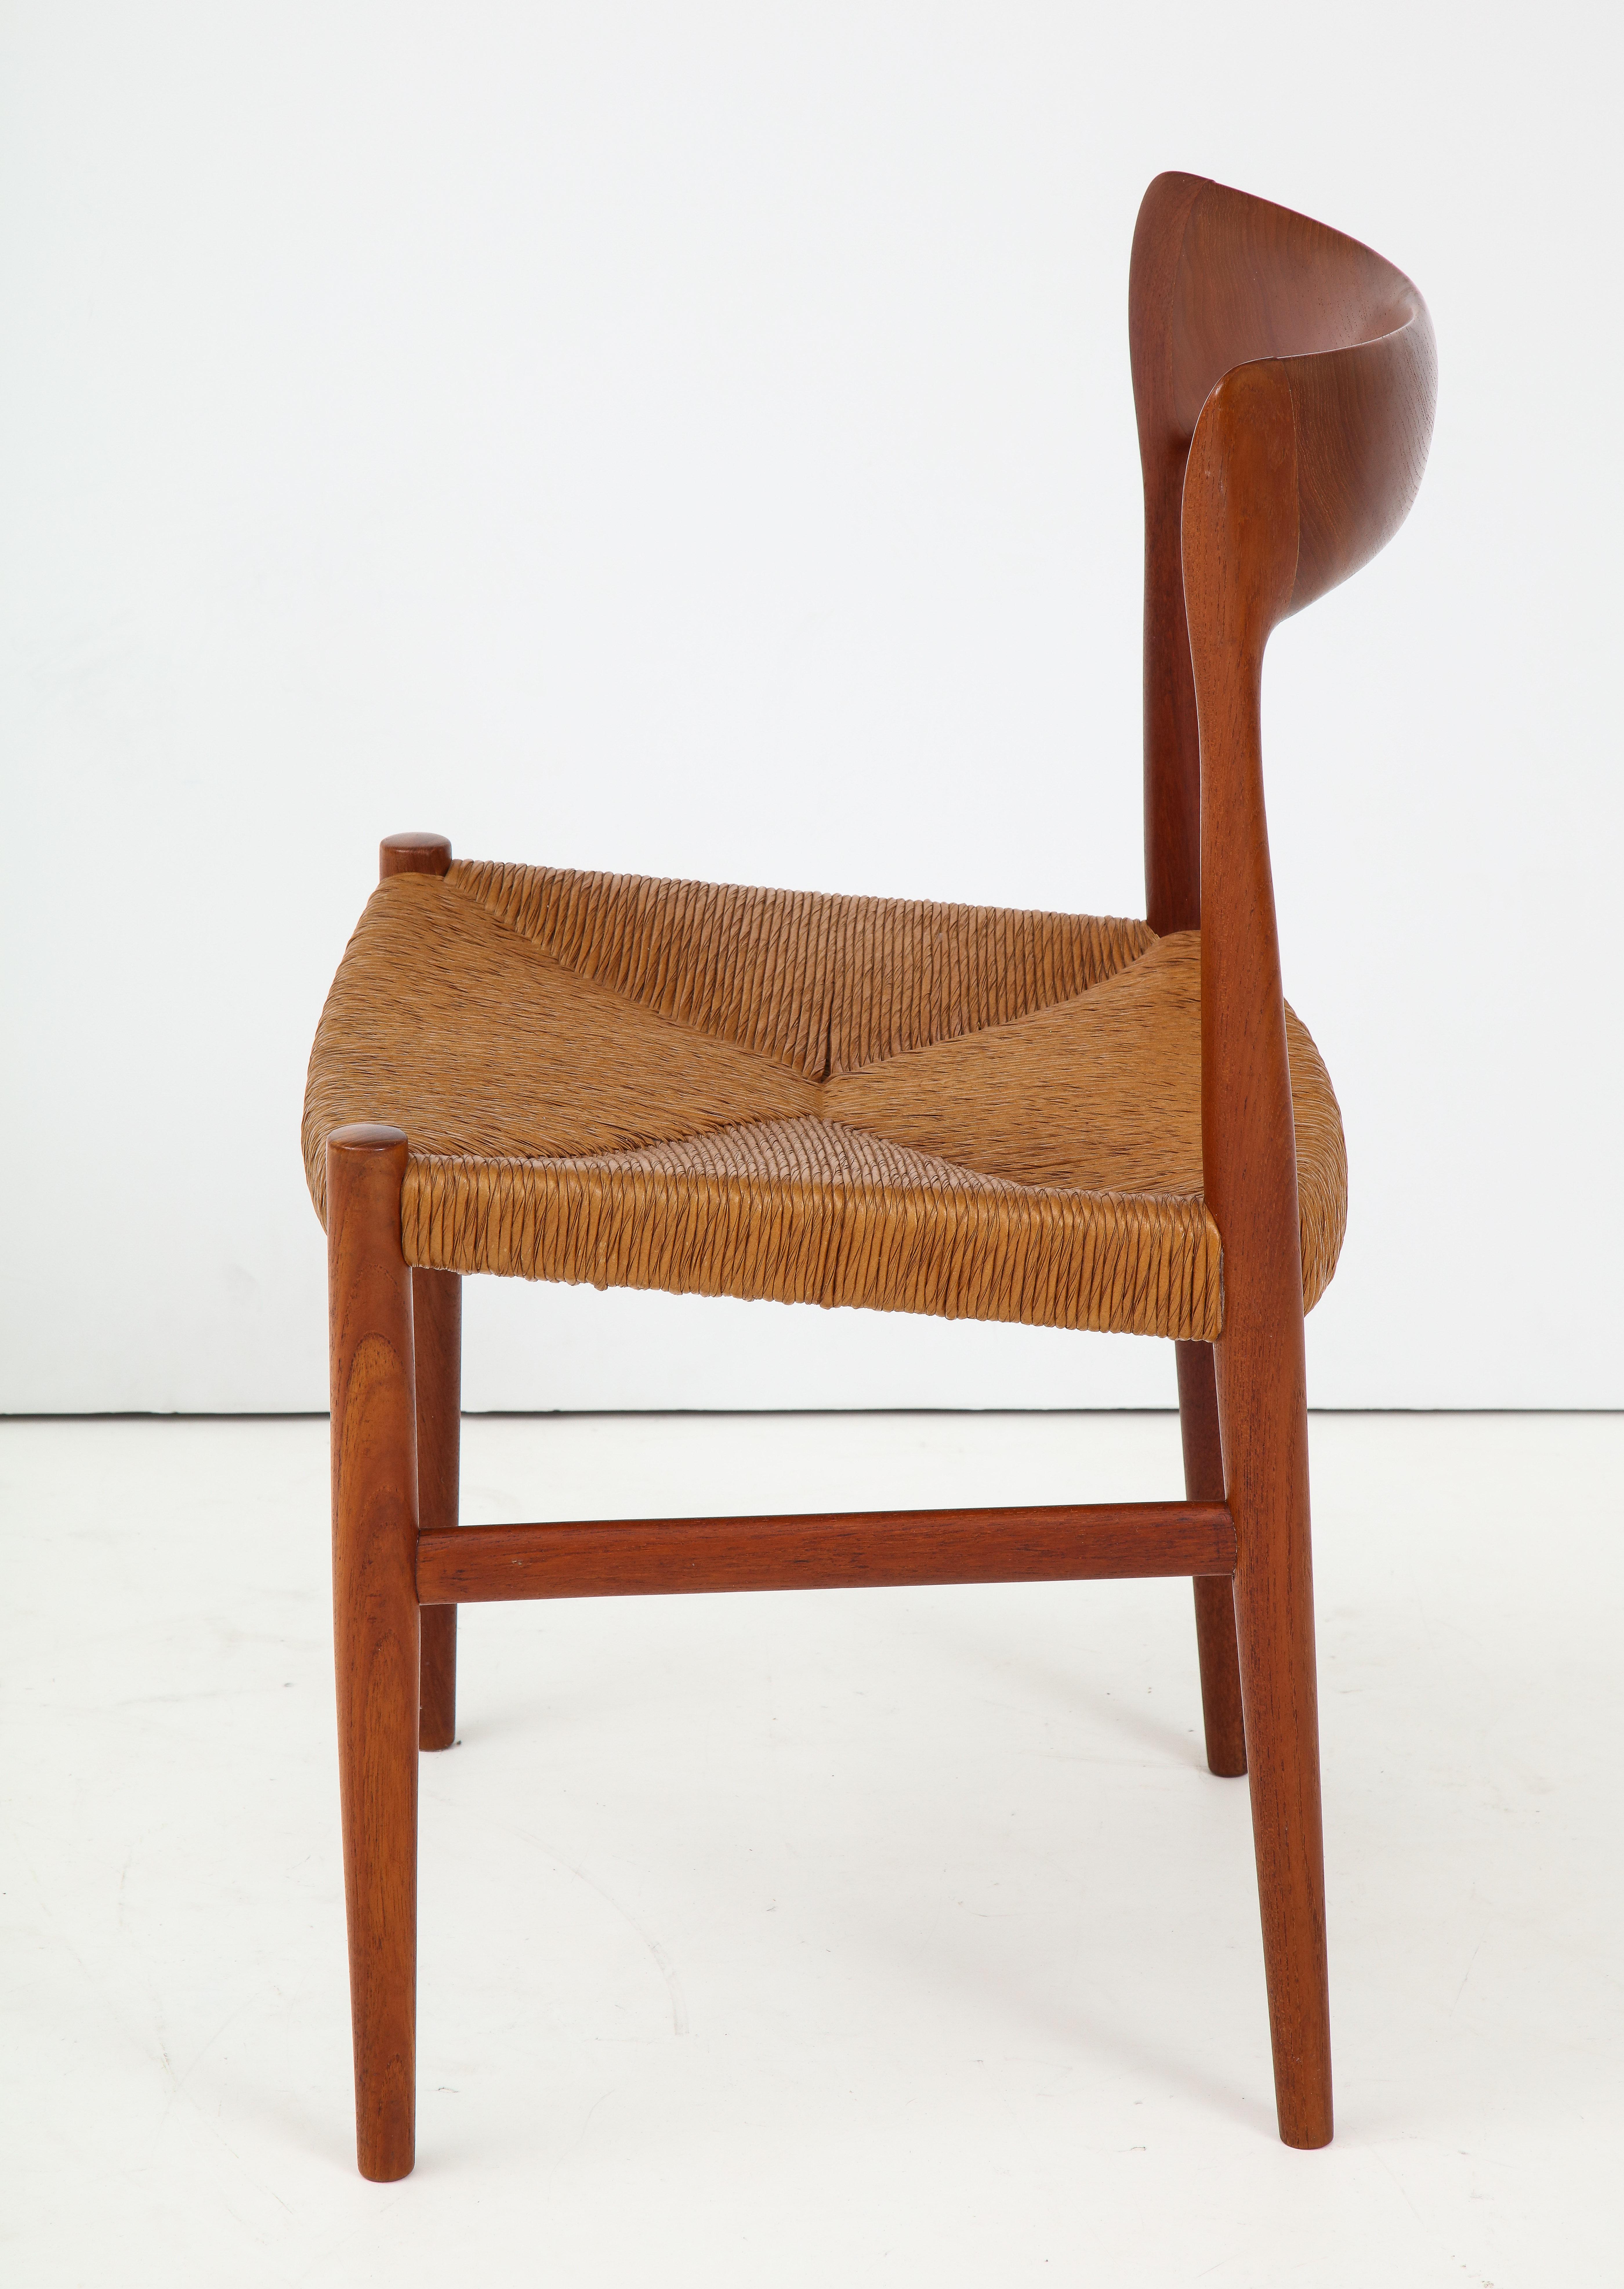 1950s Danish Teak Modernist Dining Chairs with Paper Cord Seats 1